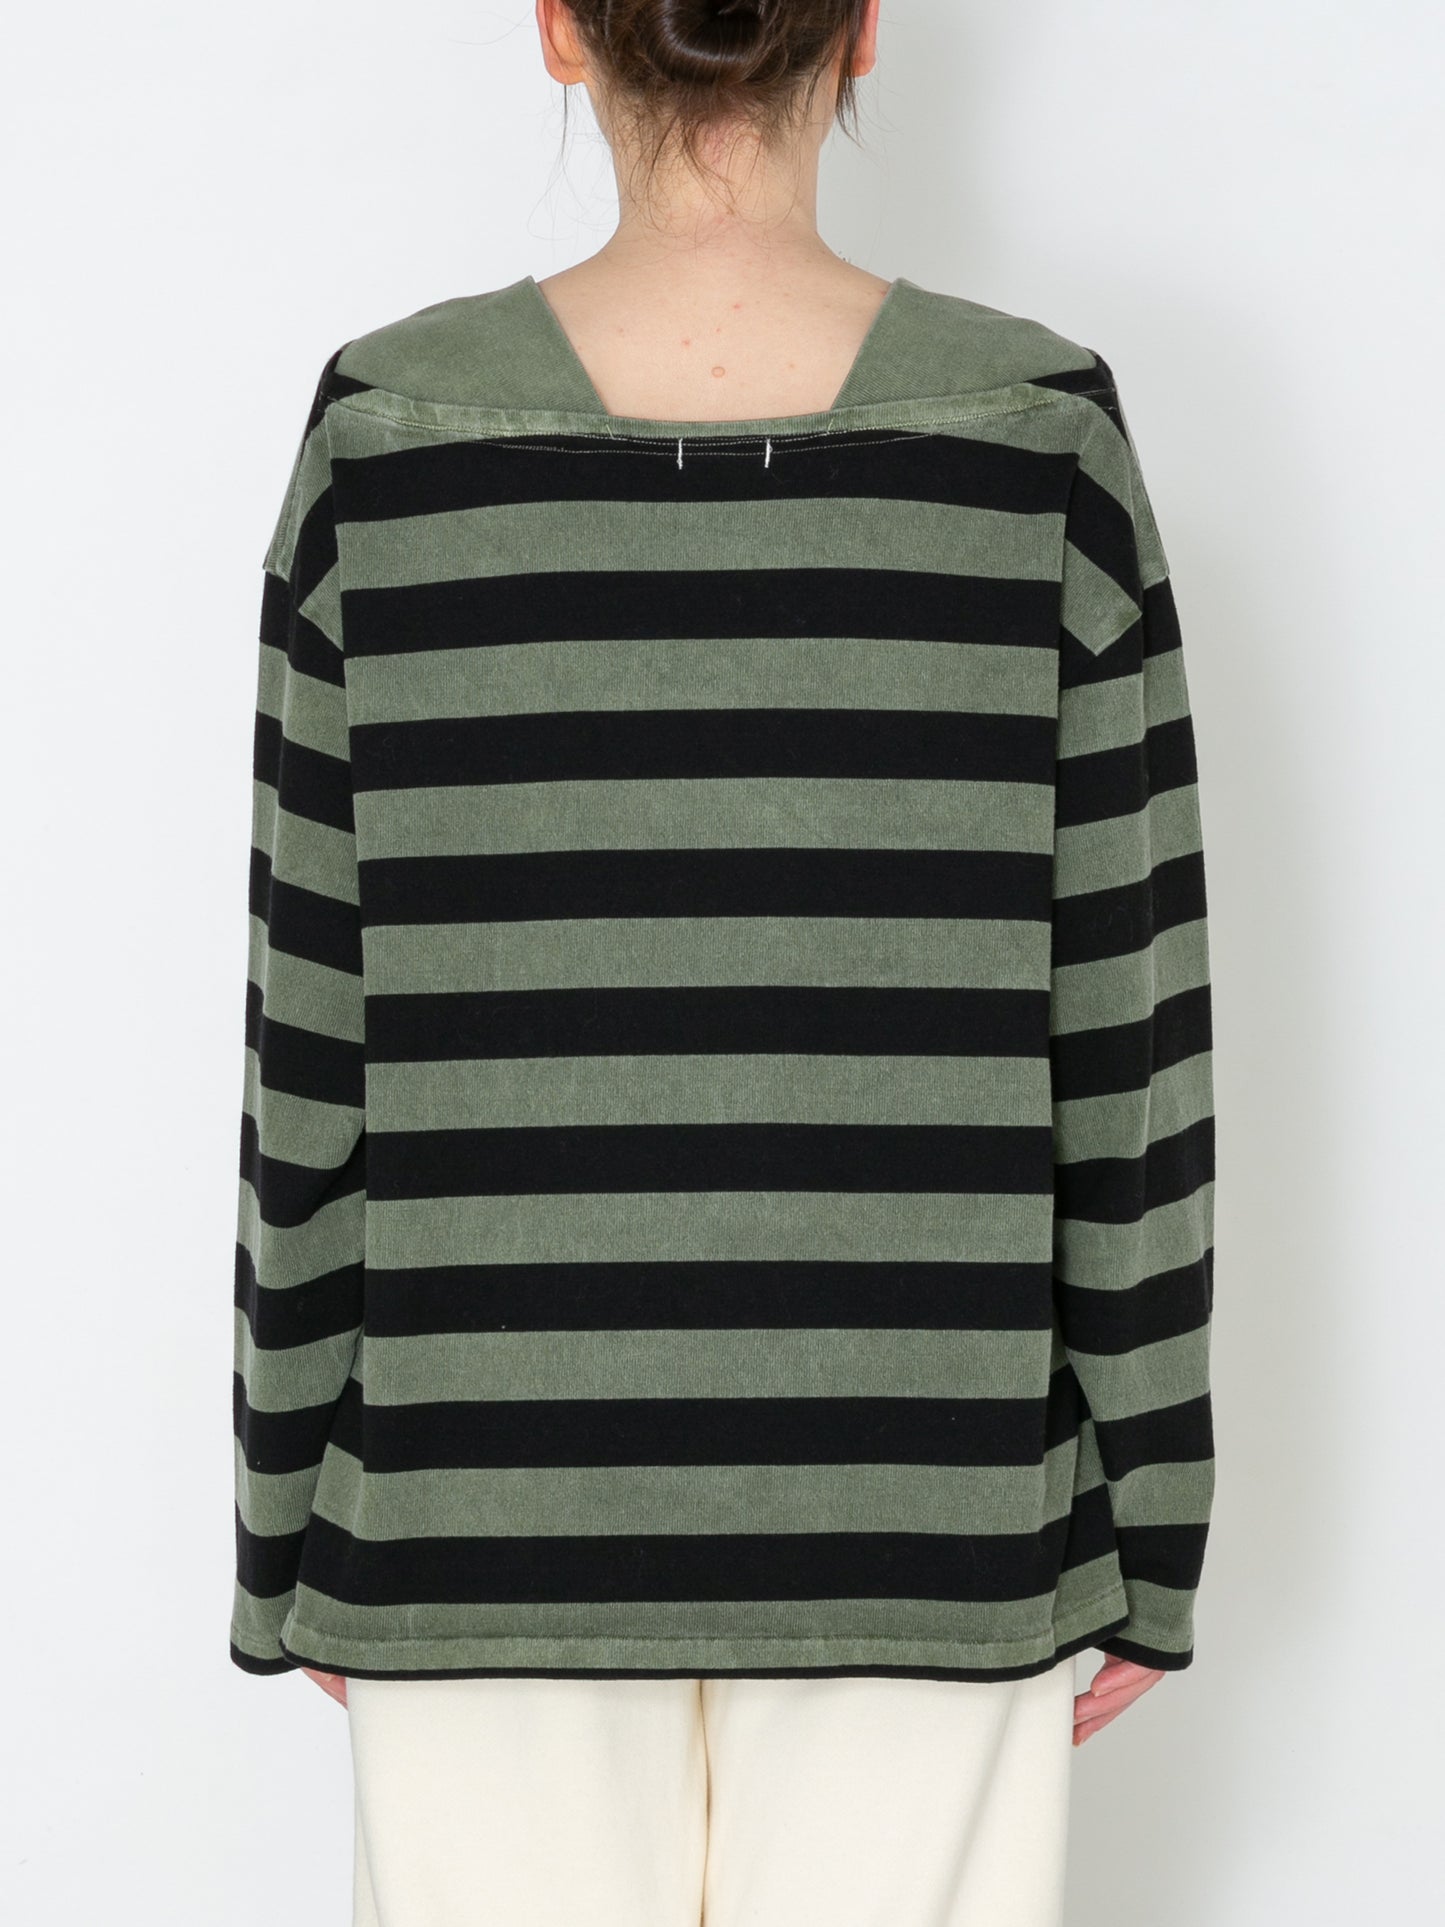 BAGGY BOAT L/S TEE COTTON BORDER JERSEY AM-C0103 Olive